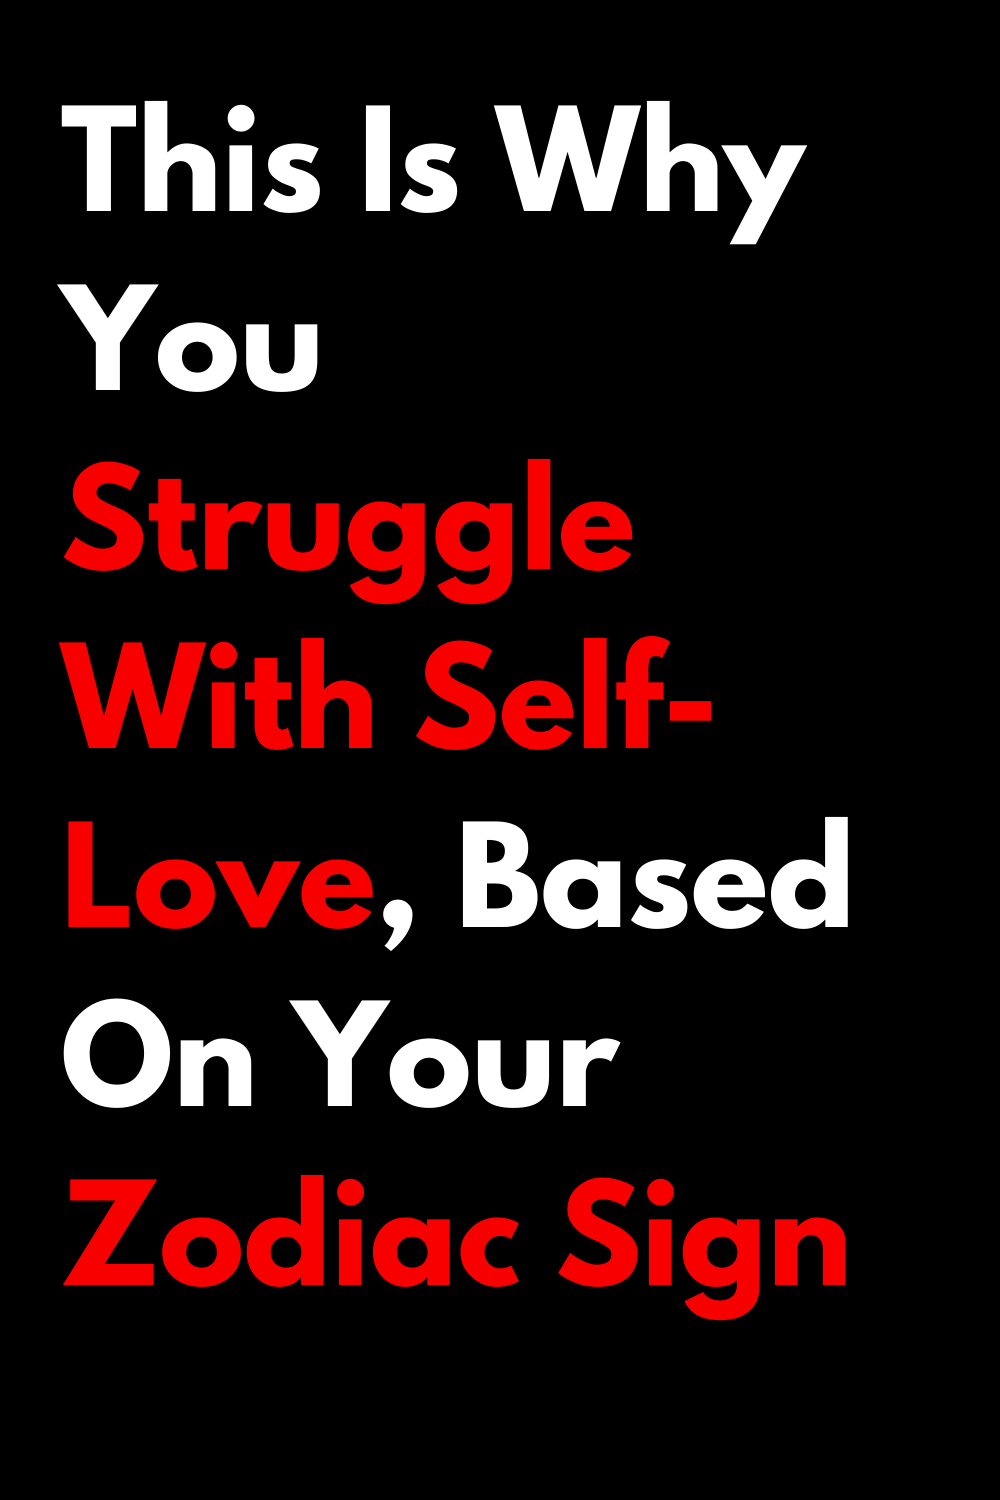 This Is Why You Struggle With Self-Love, Based On Your Zodiac Sign